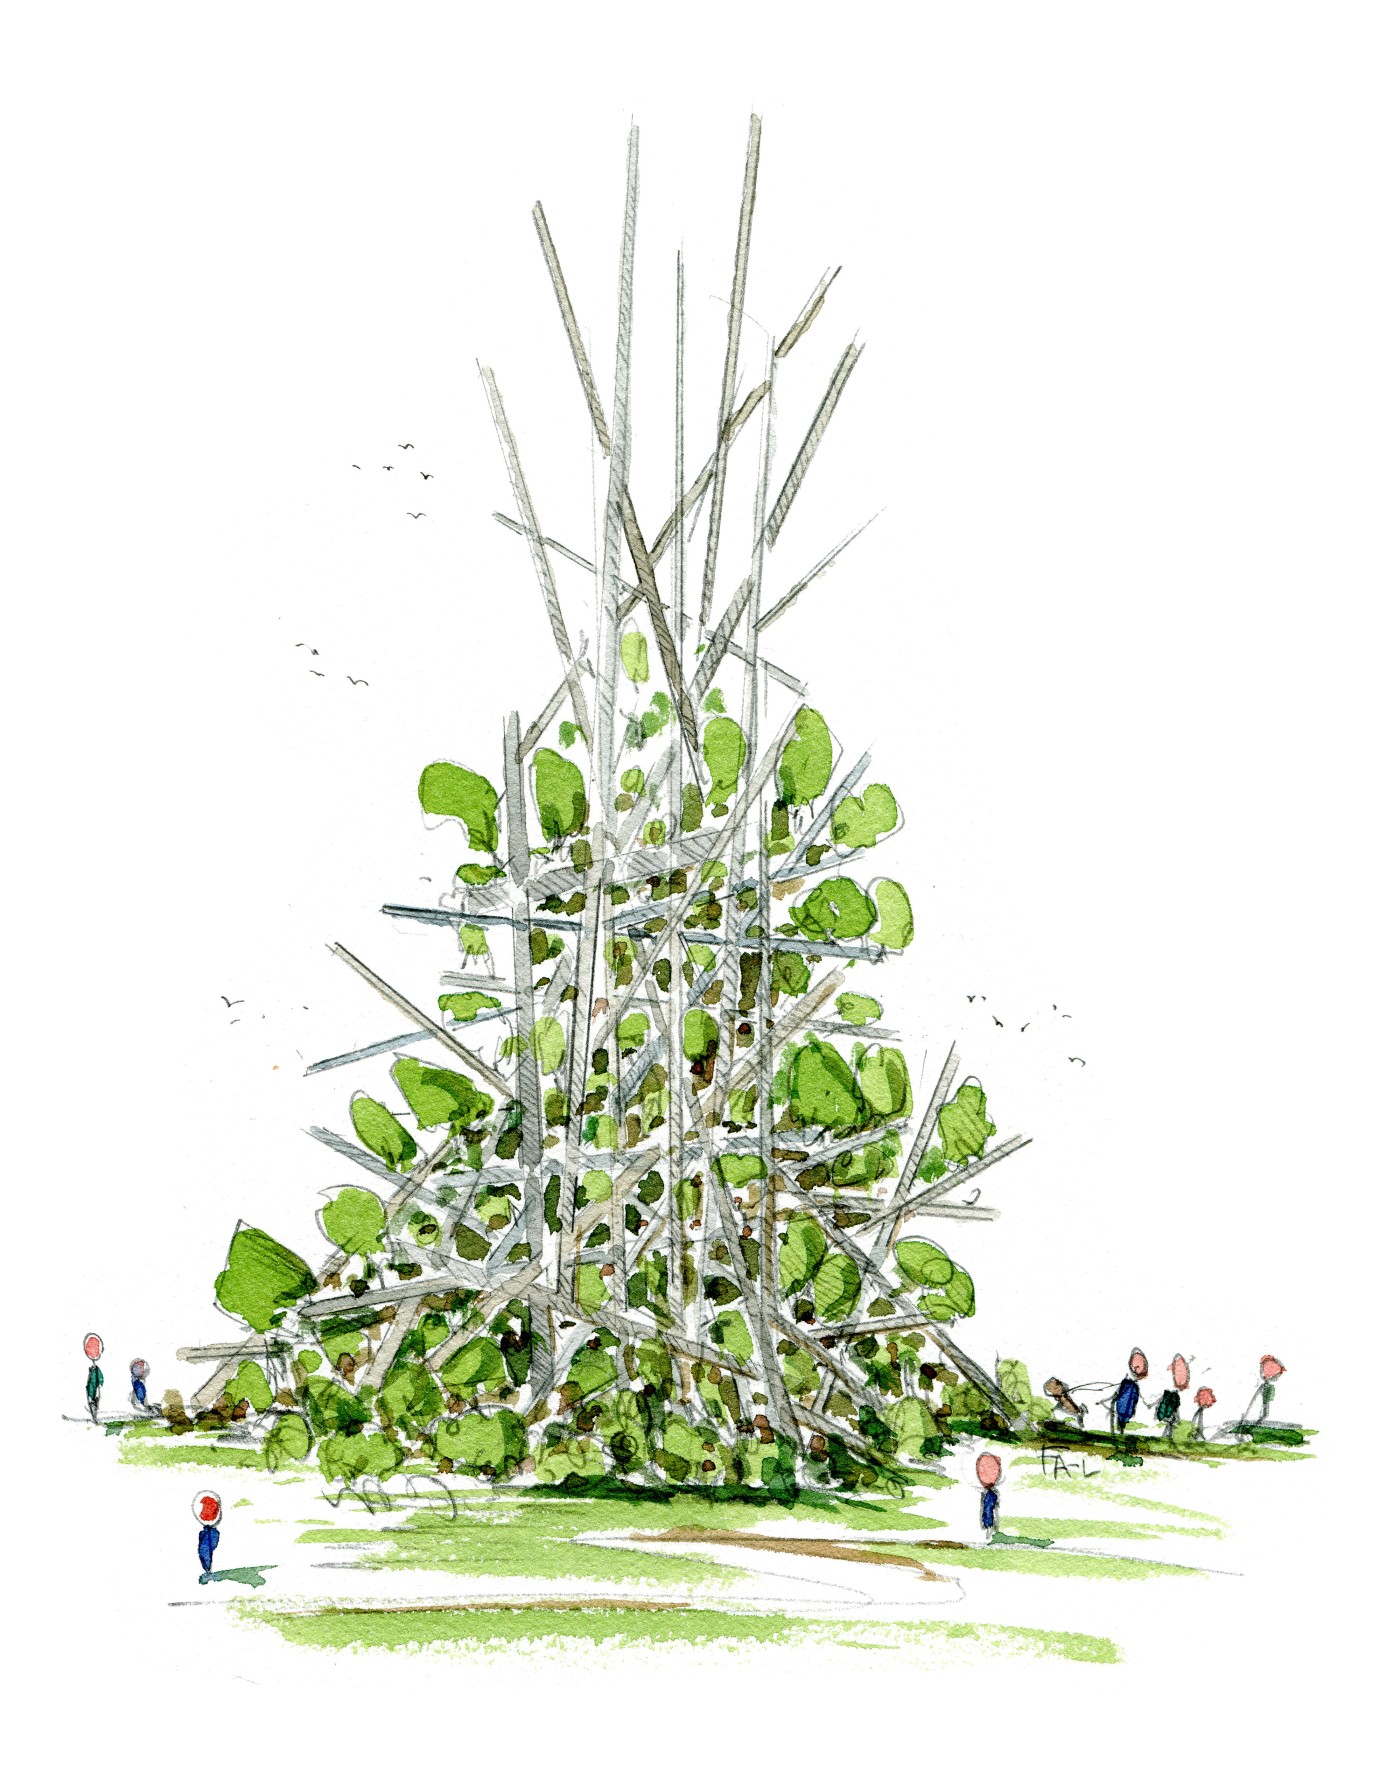 Concept sketch idea of a biodiversity sculpture, made from local garden cut off. idea by Frits Ahlefeldt